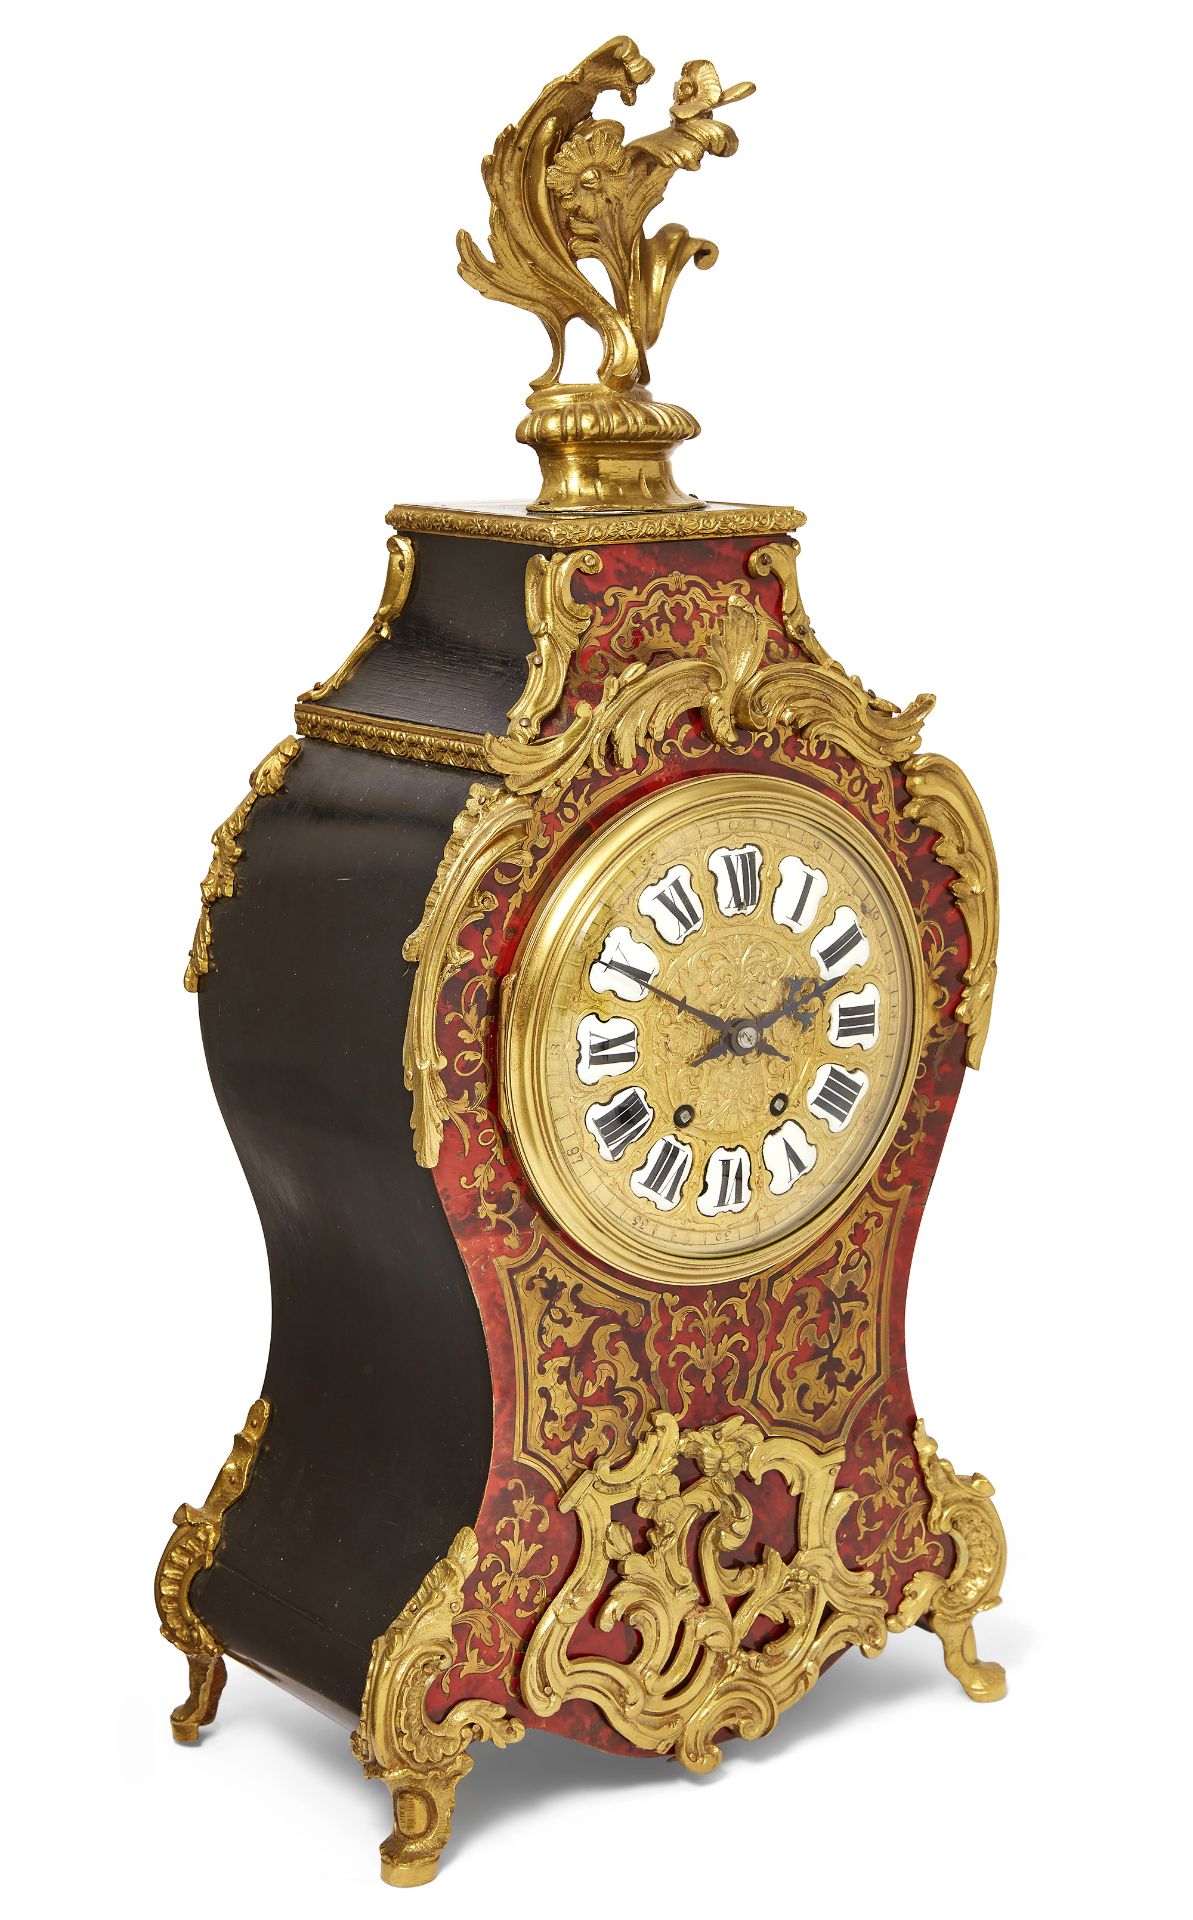 A French gilt-bronze mounted brass inlaid tortoiseshell bracket clock, in the manner of André-Cha... - Image 2 of 2